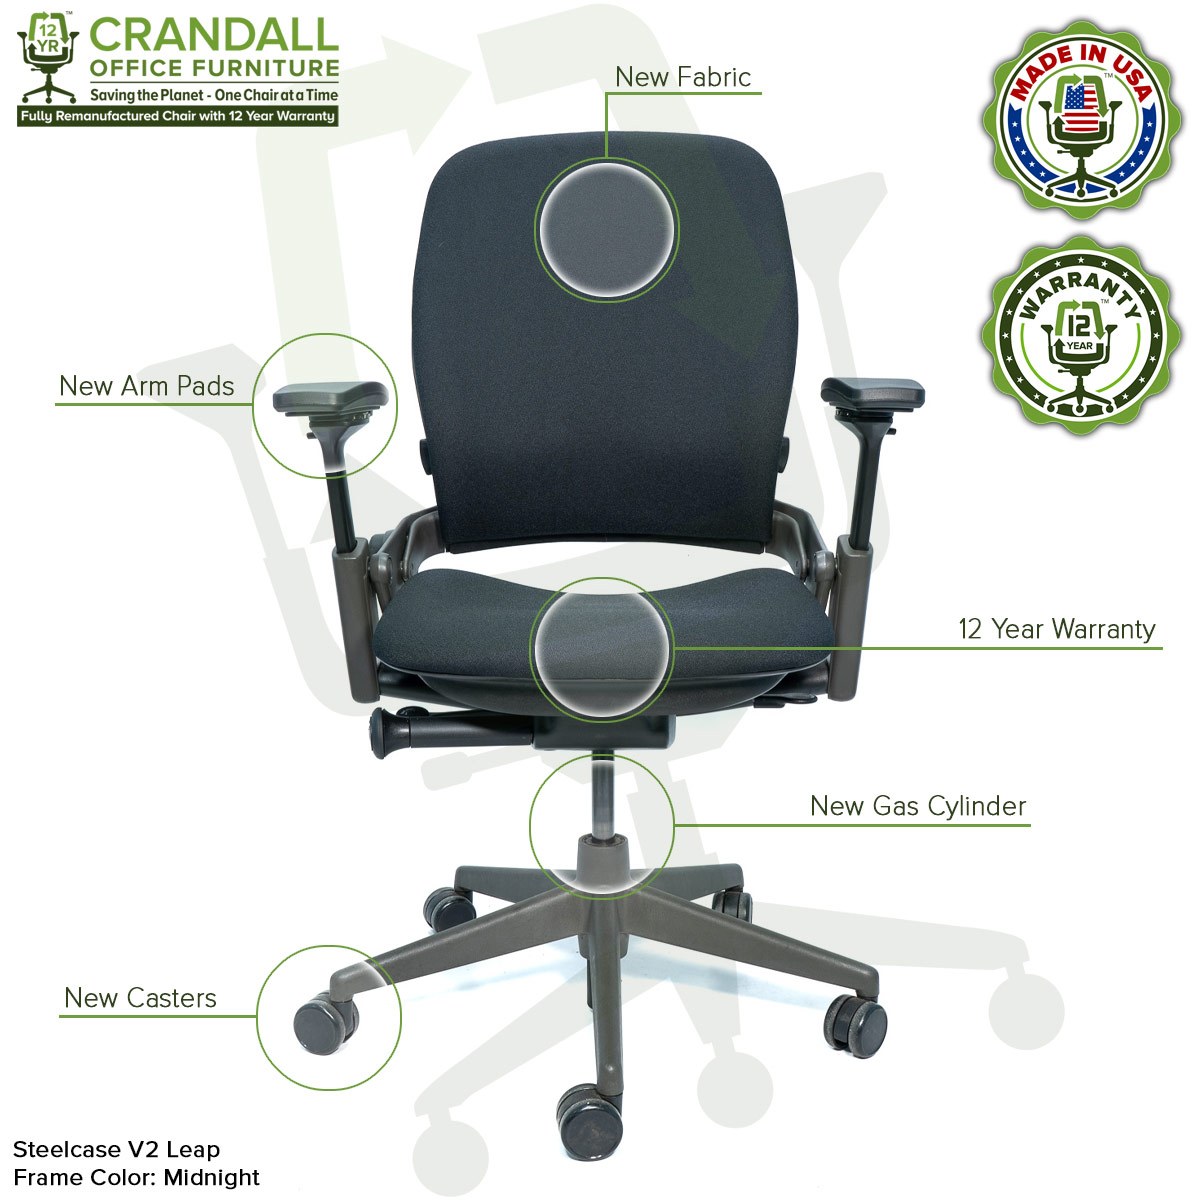 Crandall Office Furniture Remanufactured Steelcase V2 Leap Chair - Midnight Frame Features